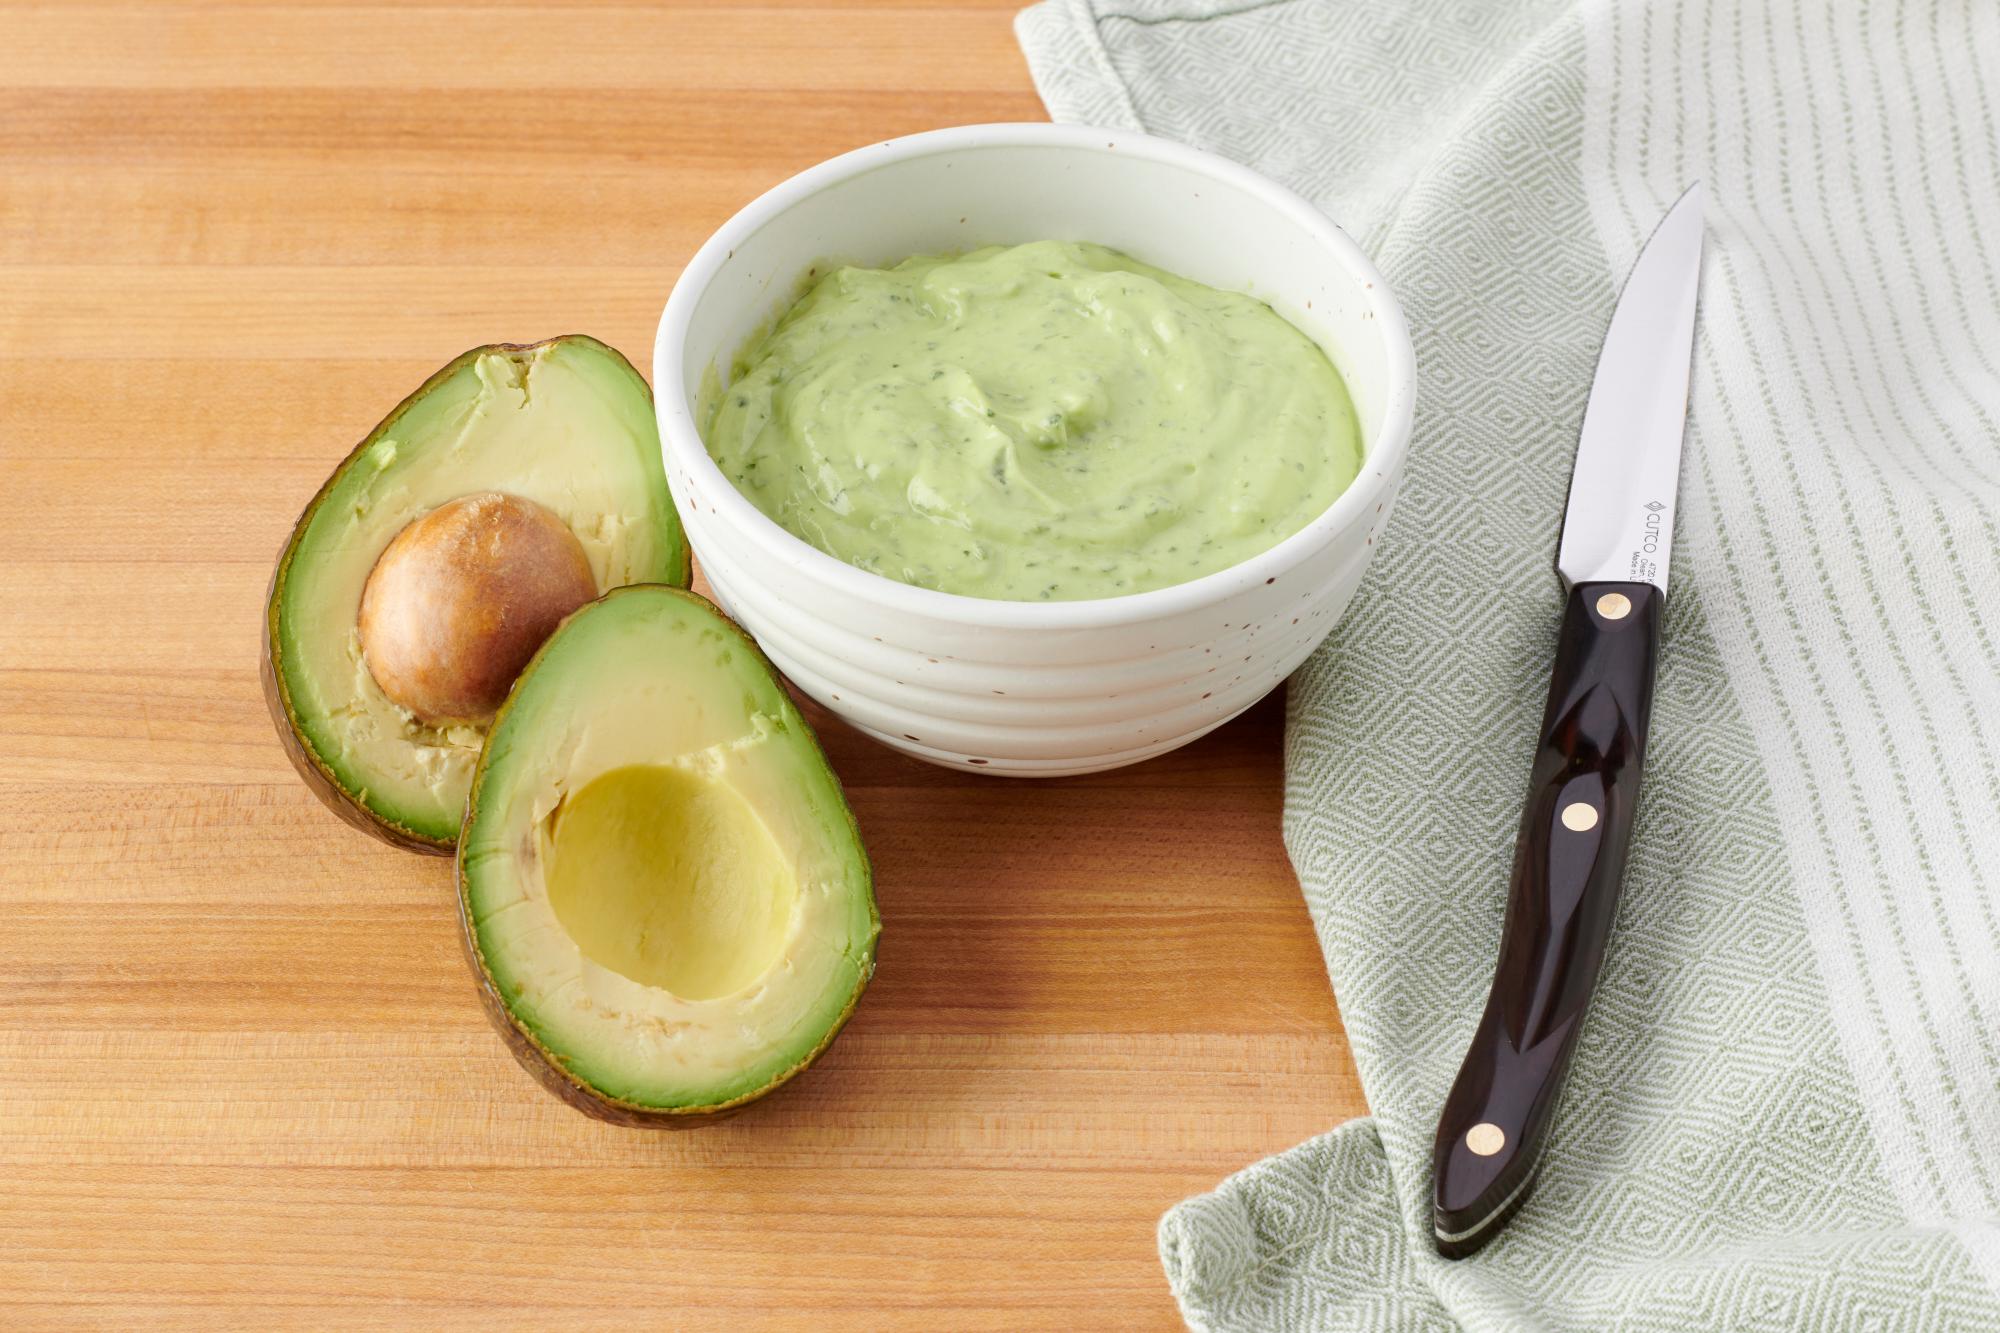 4 Inch Gourmet Paring Knife with the Creamy Avocado Dip.